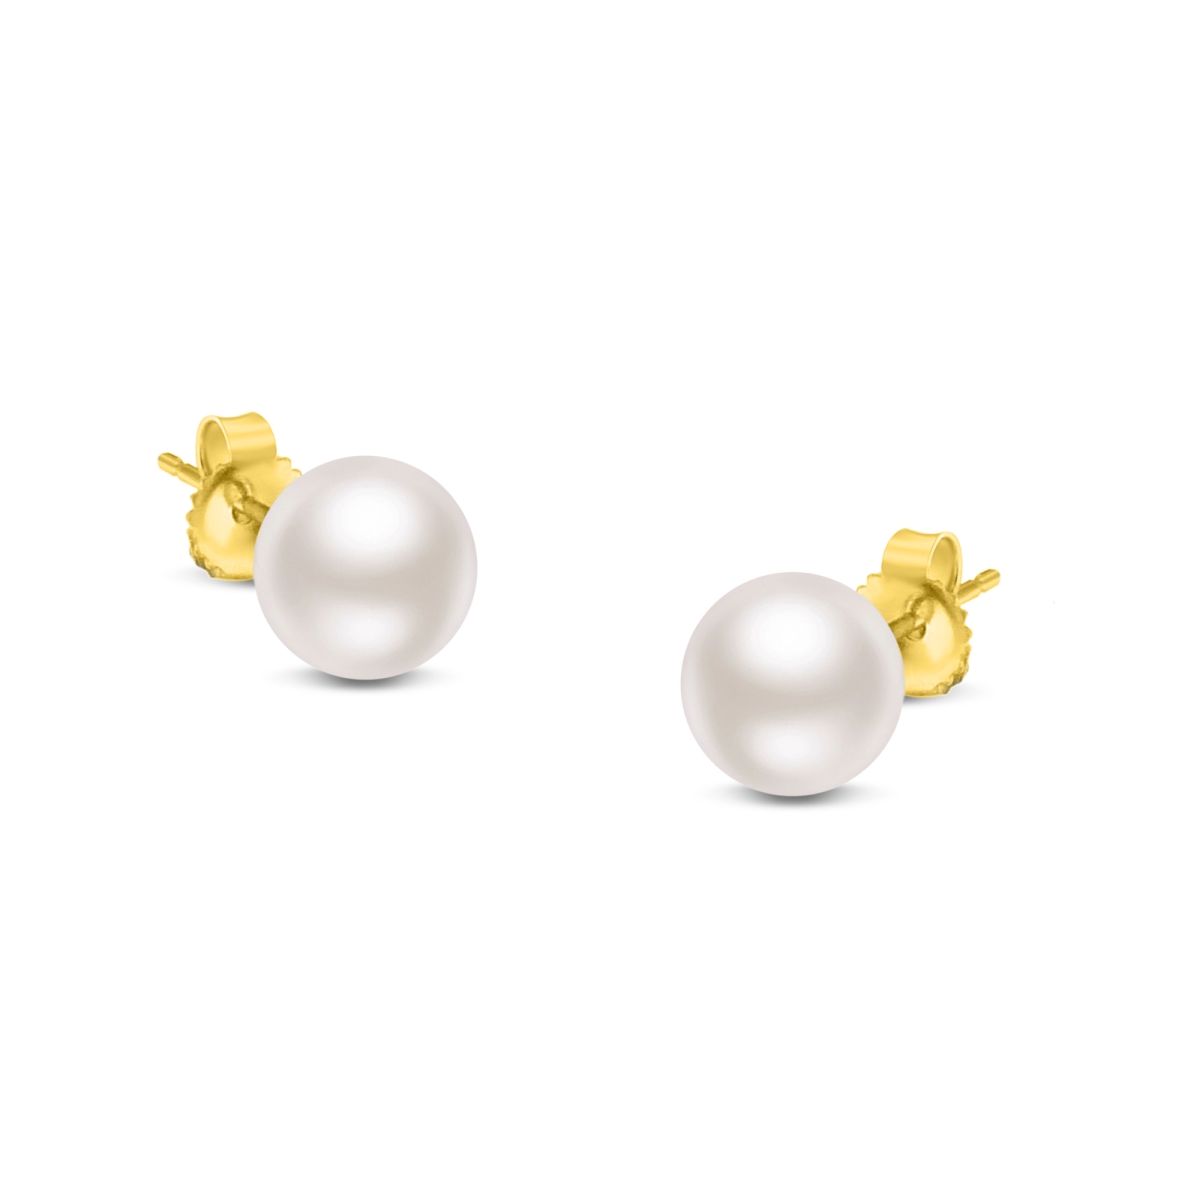 Infinite Jewels 018308ES35 14K Yellow Gold Round White 6.0-6.5 mm Saltwater Akoya Cultured Pearl Stud Earrings for AAA plus Quality